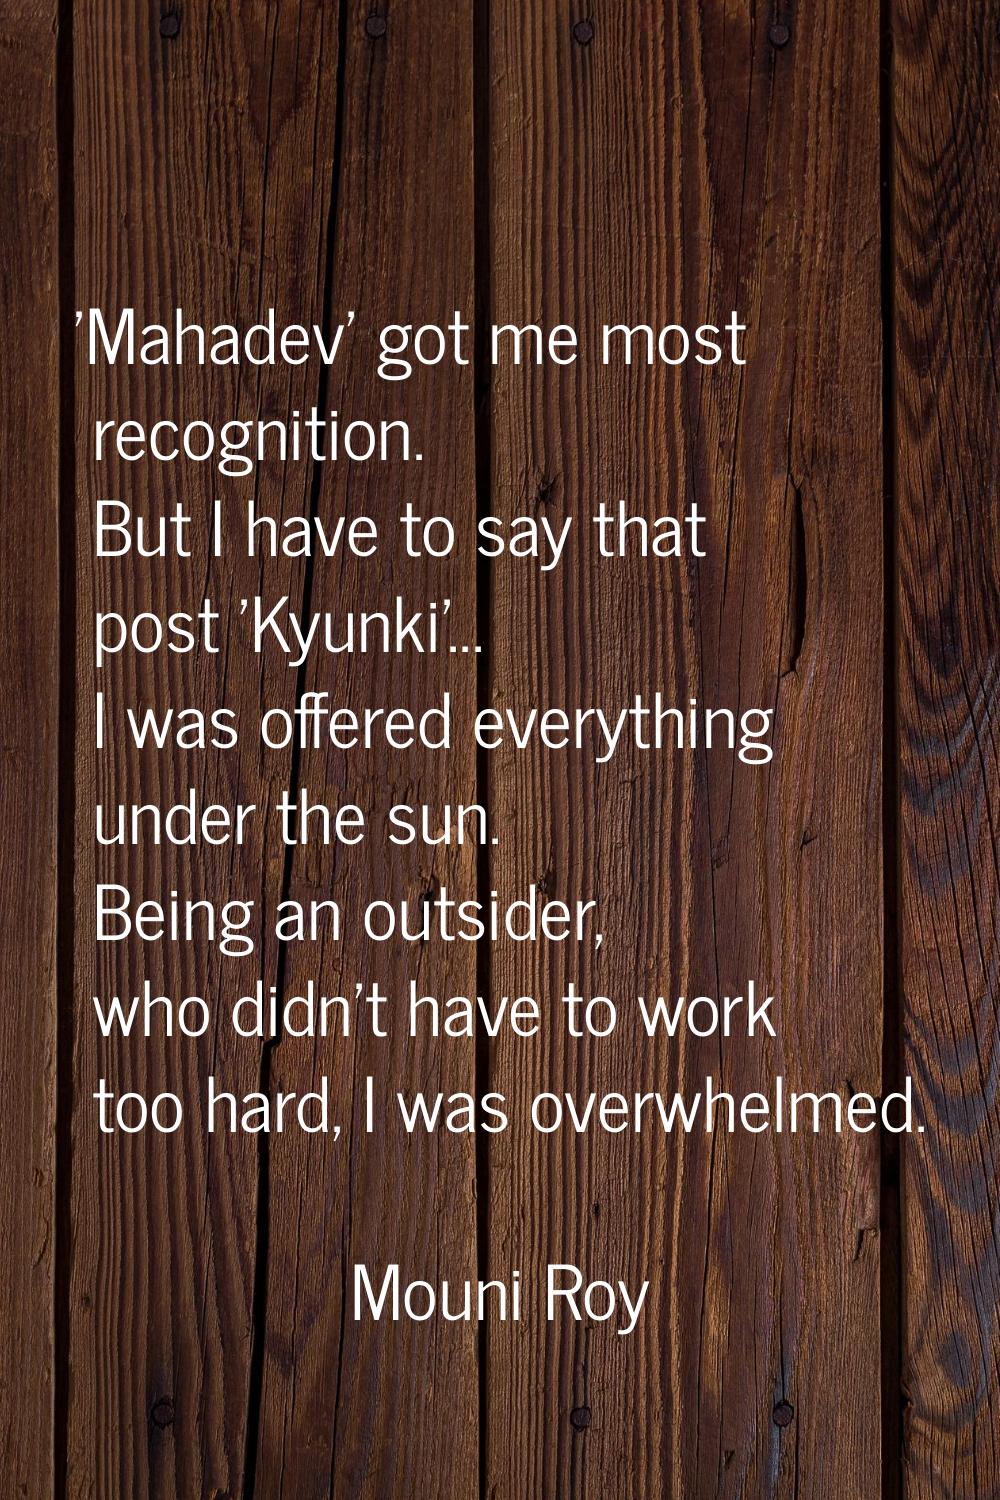 'Mahadev' got me most recognition. But I have to say that post 'Kyunki'... I was offered everything